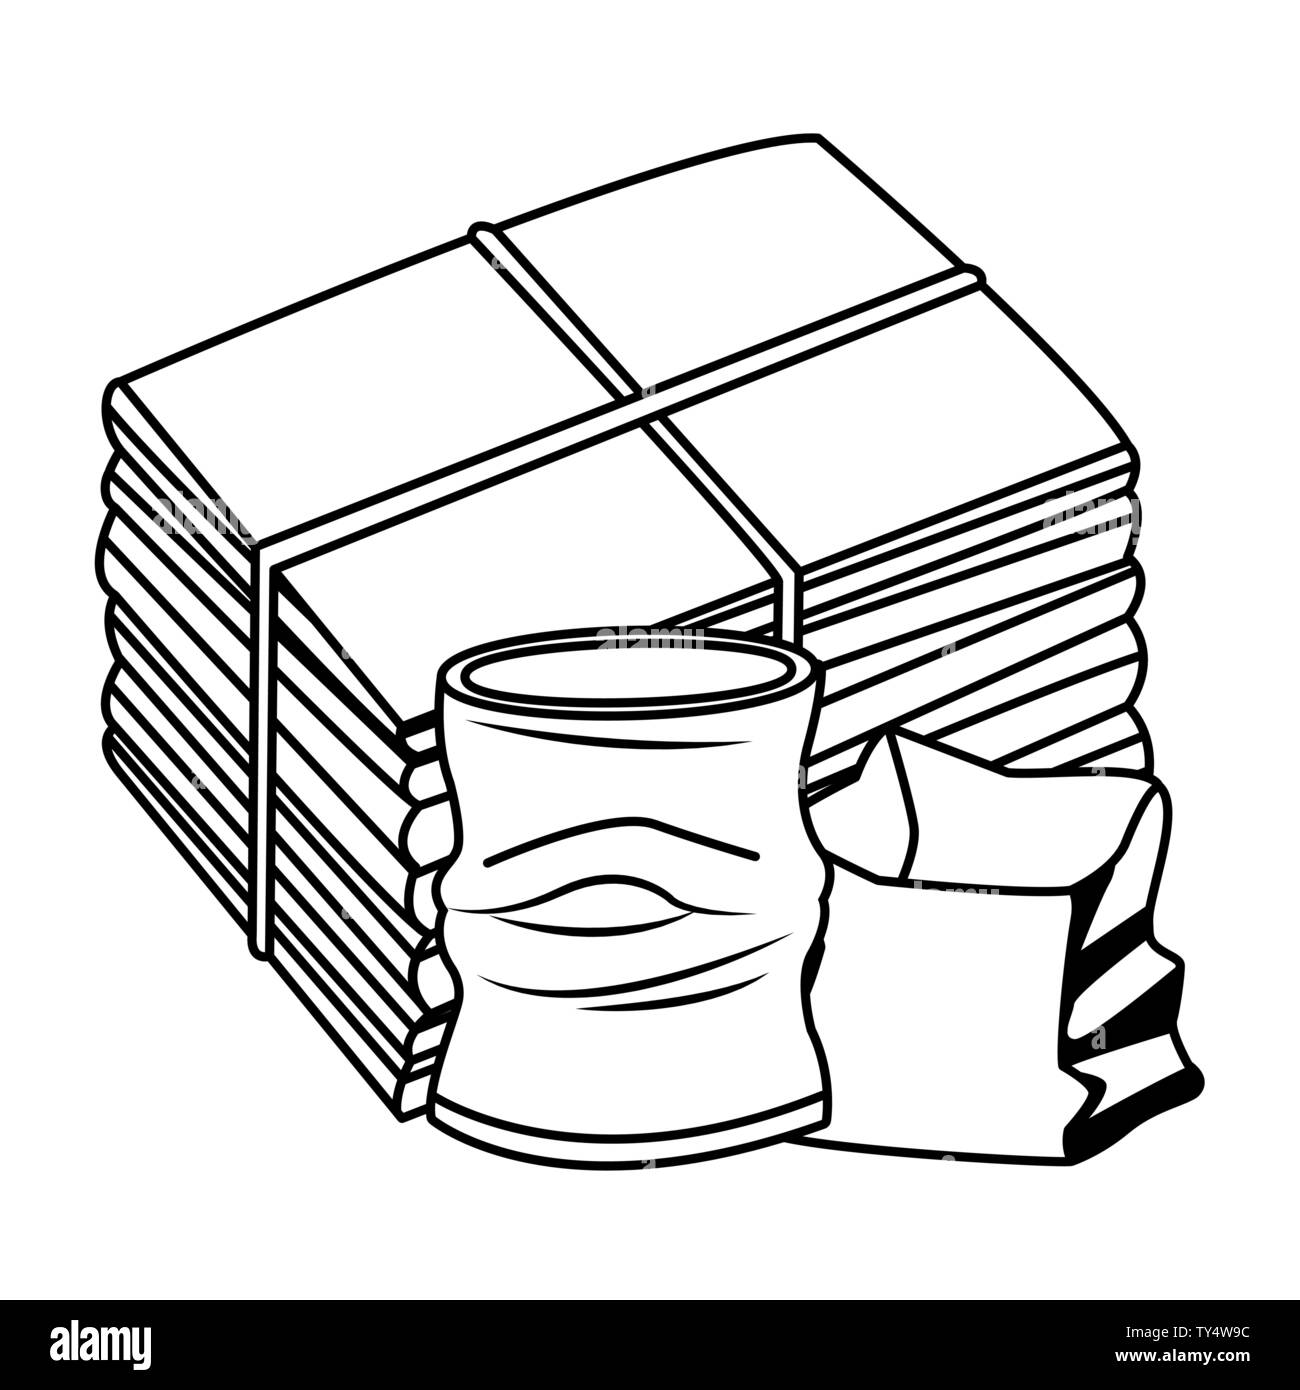 https://c8.alamy.com/comp/TY4W9C/crumpled-can-and-paper-icon-cartoon-in-black-and-white-TY4W9C.jpg